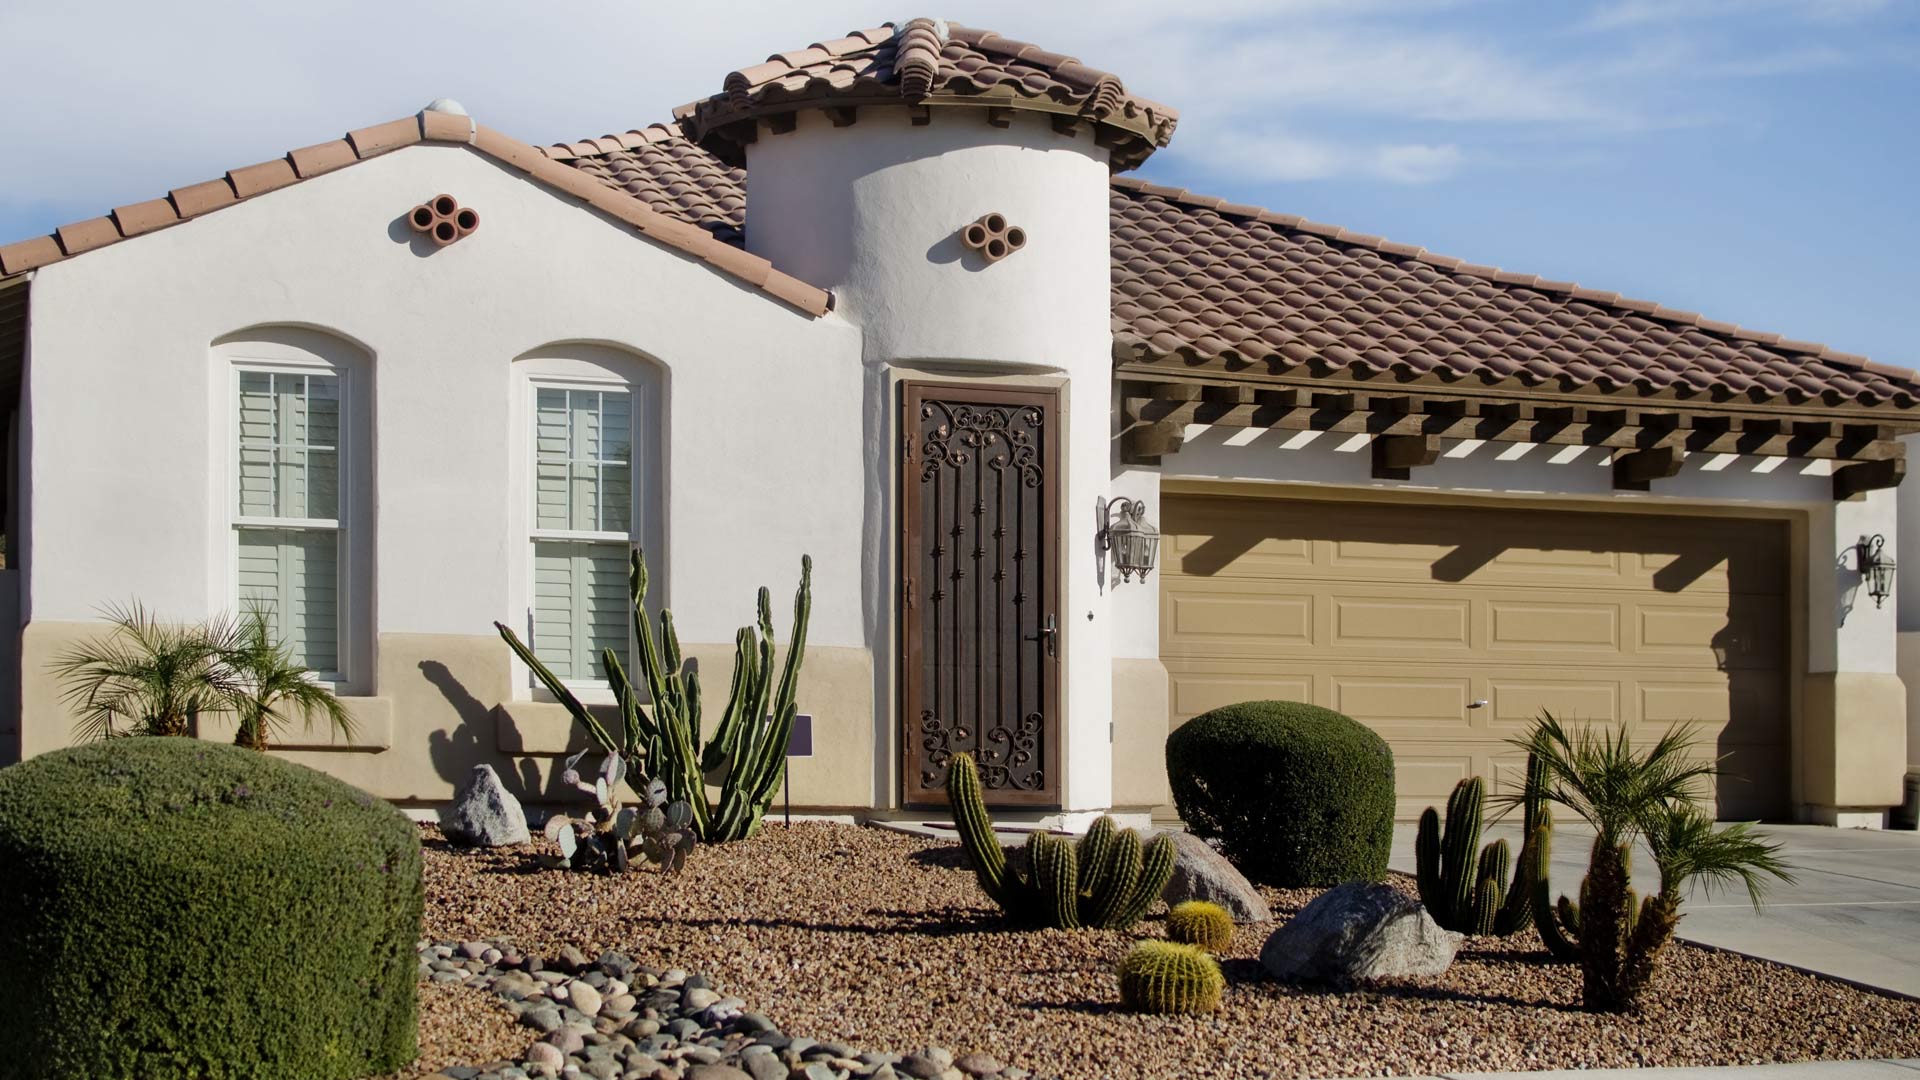 A home with rock installed and landscape maintained in Santa Teresa, NM.